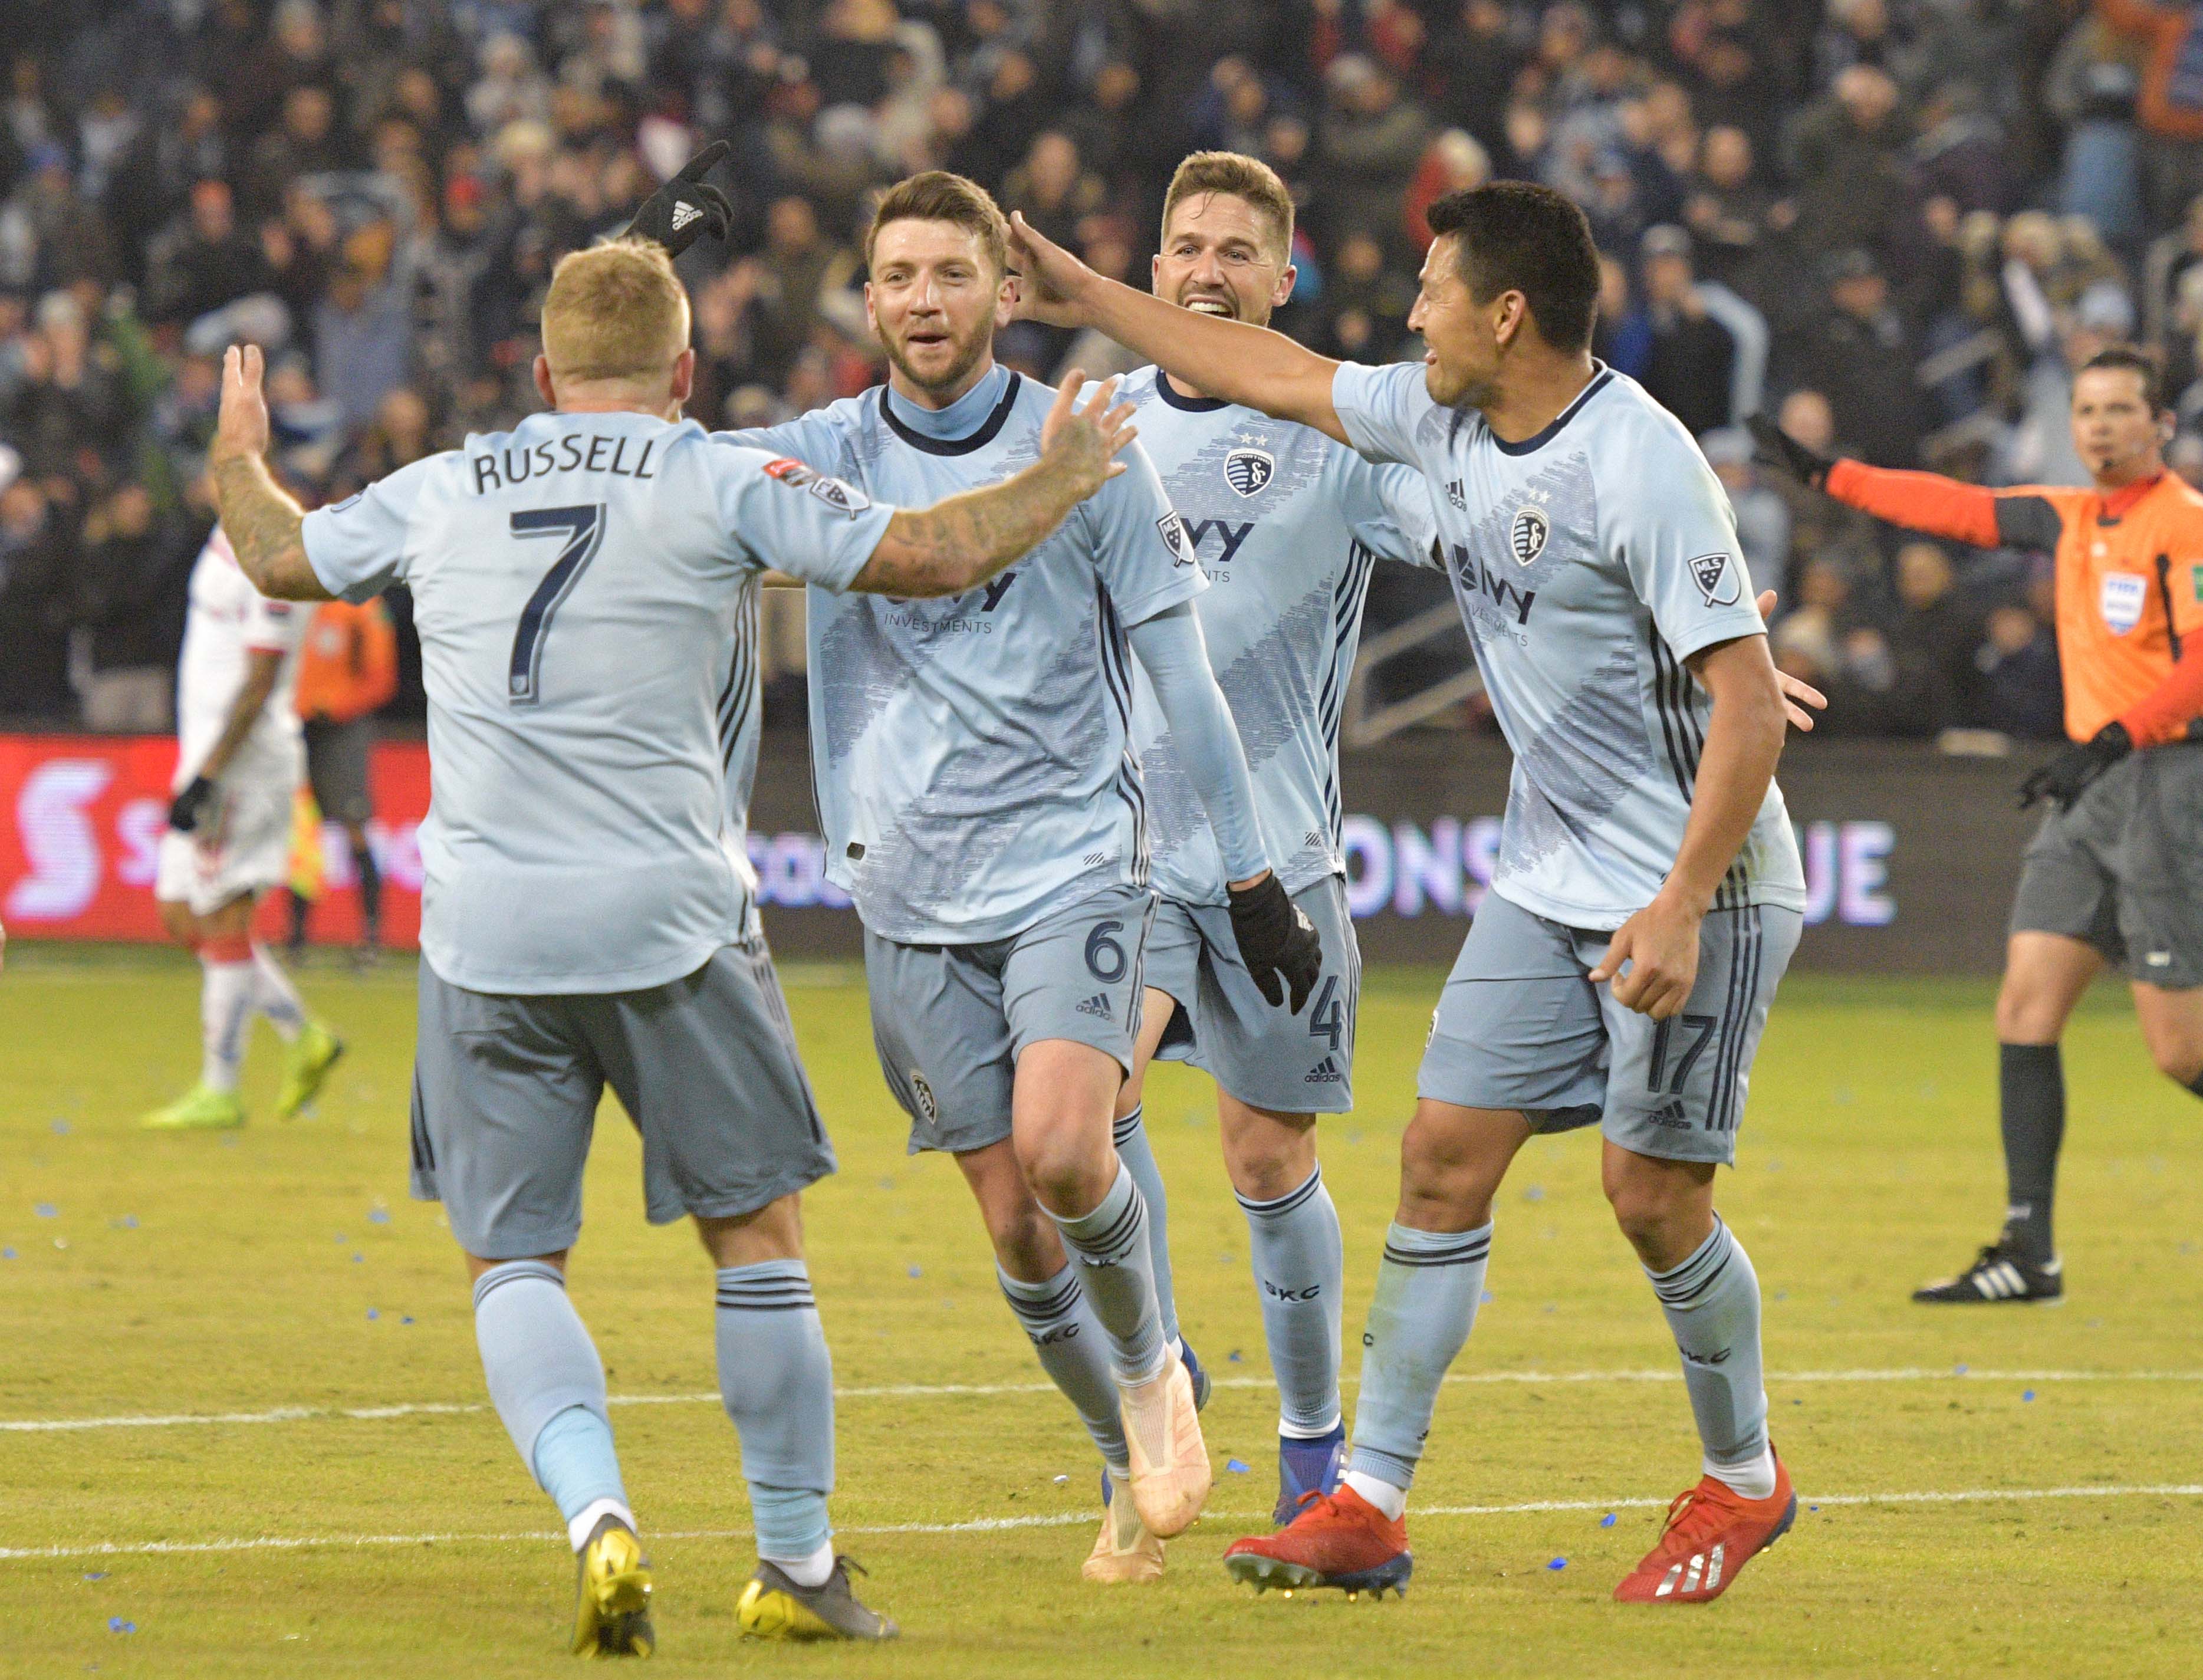 Sporting KC Weekly Schedule: Feb. 25 - March 3, 2019 | Sporting Kansas City